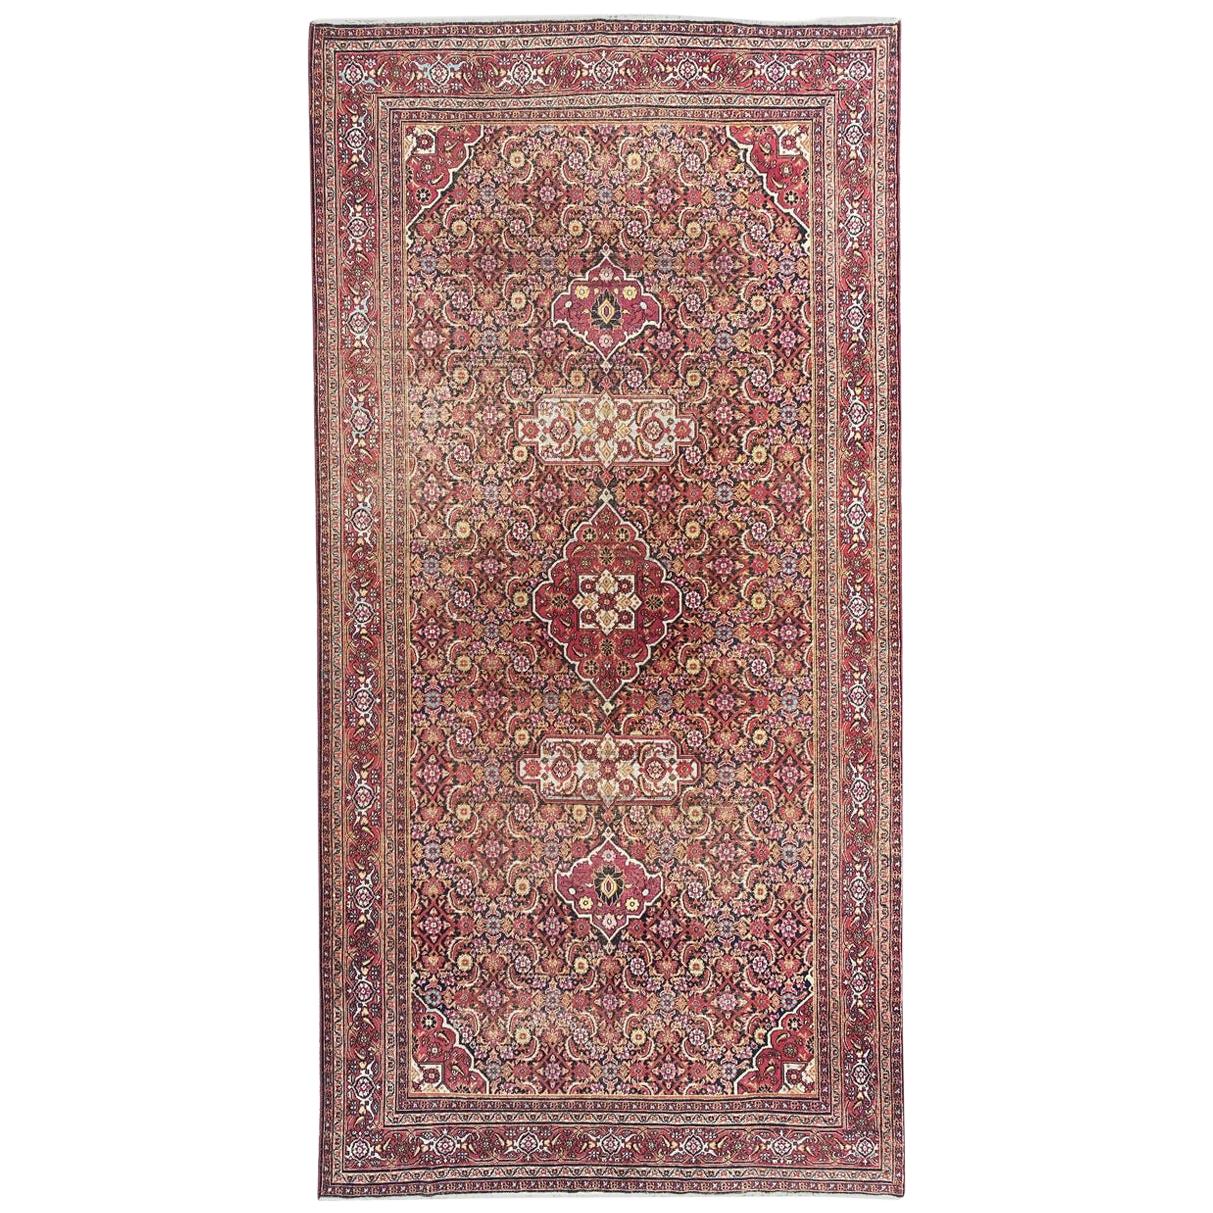 Bobyrug’s Wonderful Early 19th Century Antique Khorassan Rug For Sale